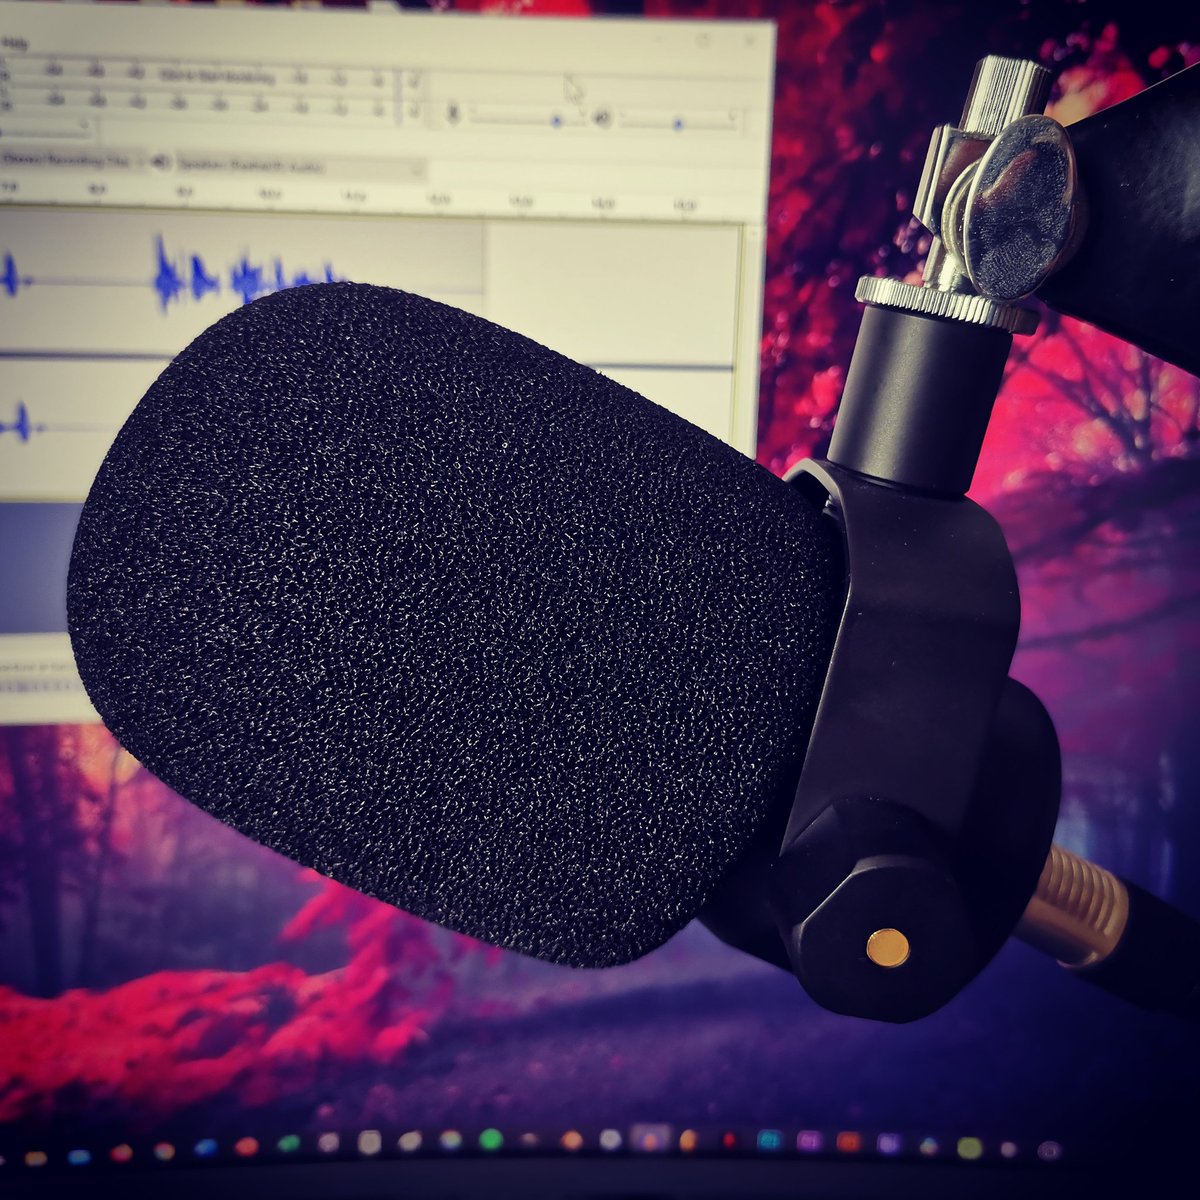 The microphone condom has finally arrived. Looking forward to making more commentaries and improving my skills

#qualityaudio #rodemicrophones #youtubecommentary #youtubepodcast #youtubepodcasts #youtubegamingchannel #streaminggames